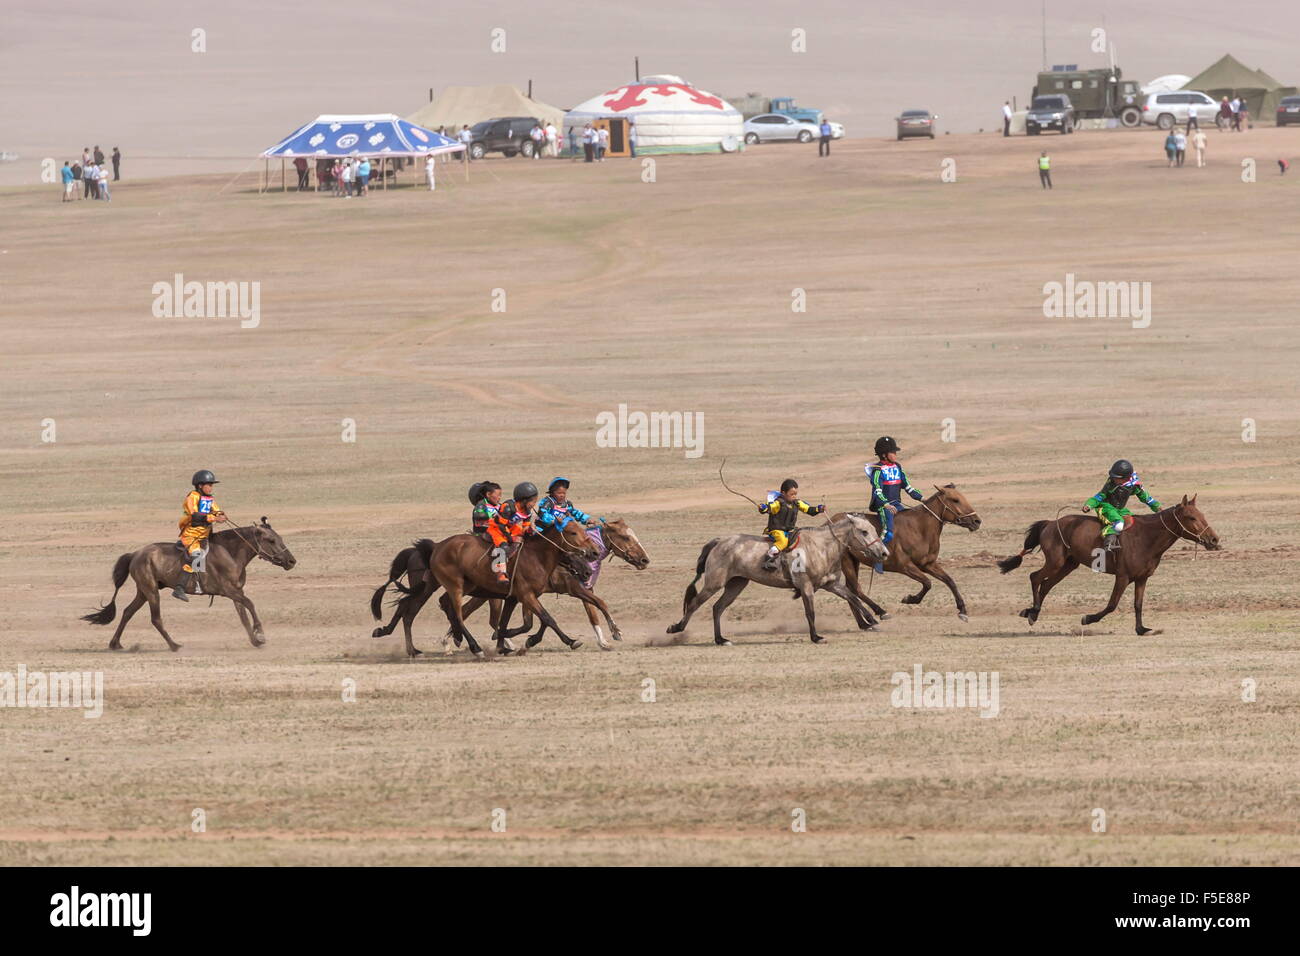 Child jockeys in a dash for the line, five-year old horse race, Naadam Festival, Hui Doloon Khutag, Ulaan Baatar, Mongolia, Asia Stock Photo